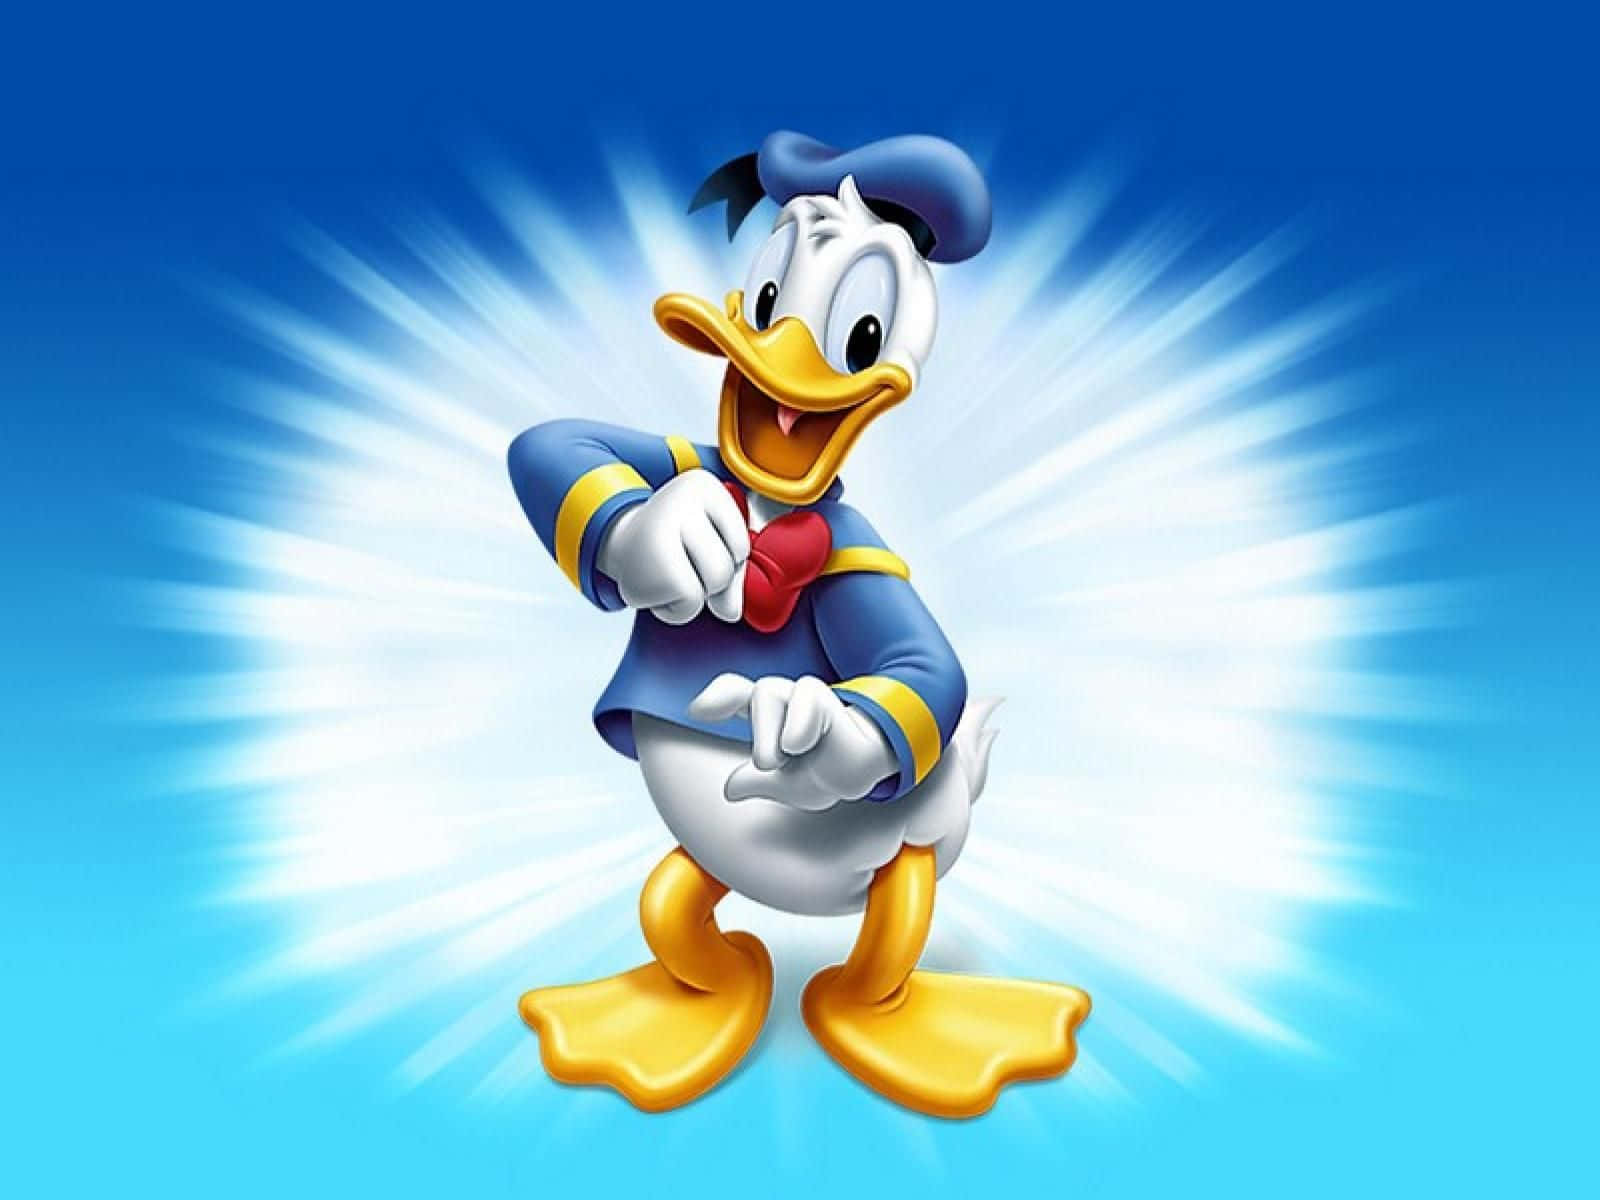 Donald Duck In Blue And White